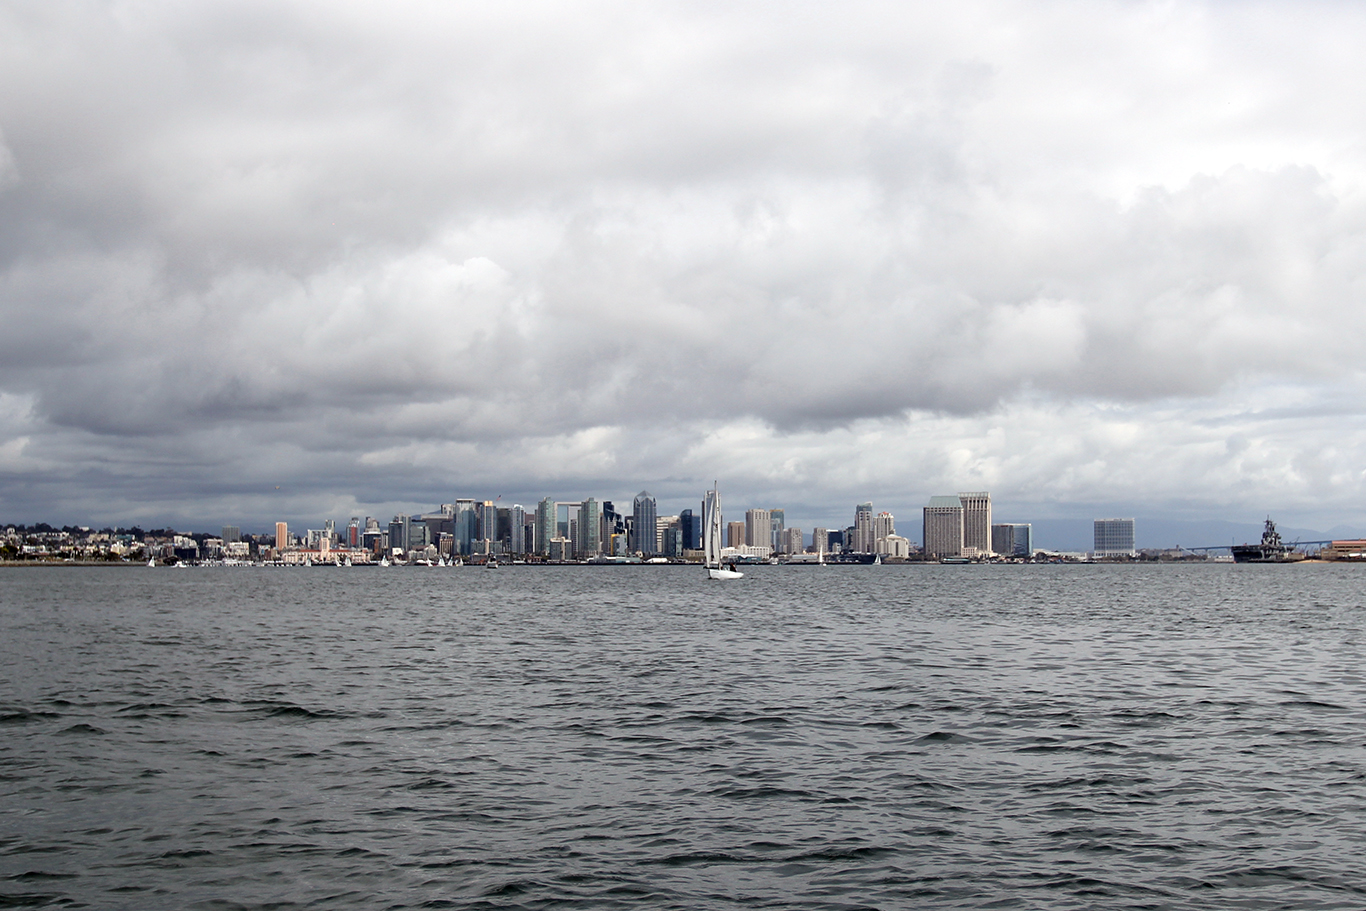 San Diego skyline from the Pacific ocean